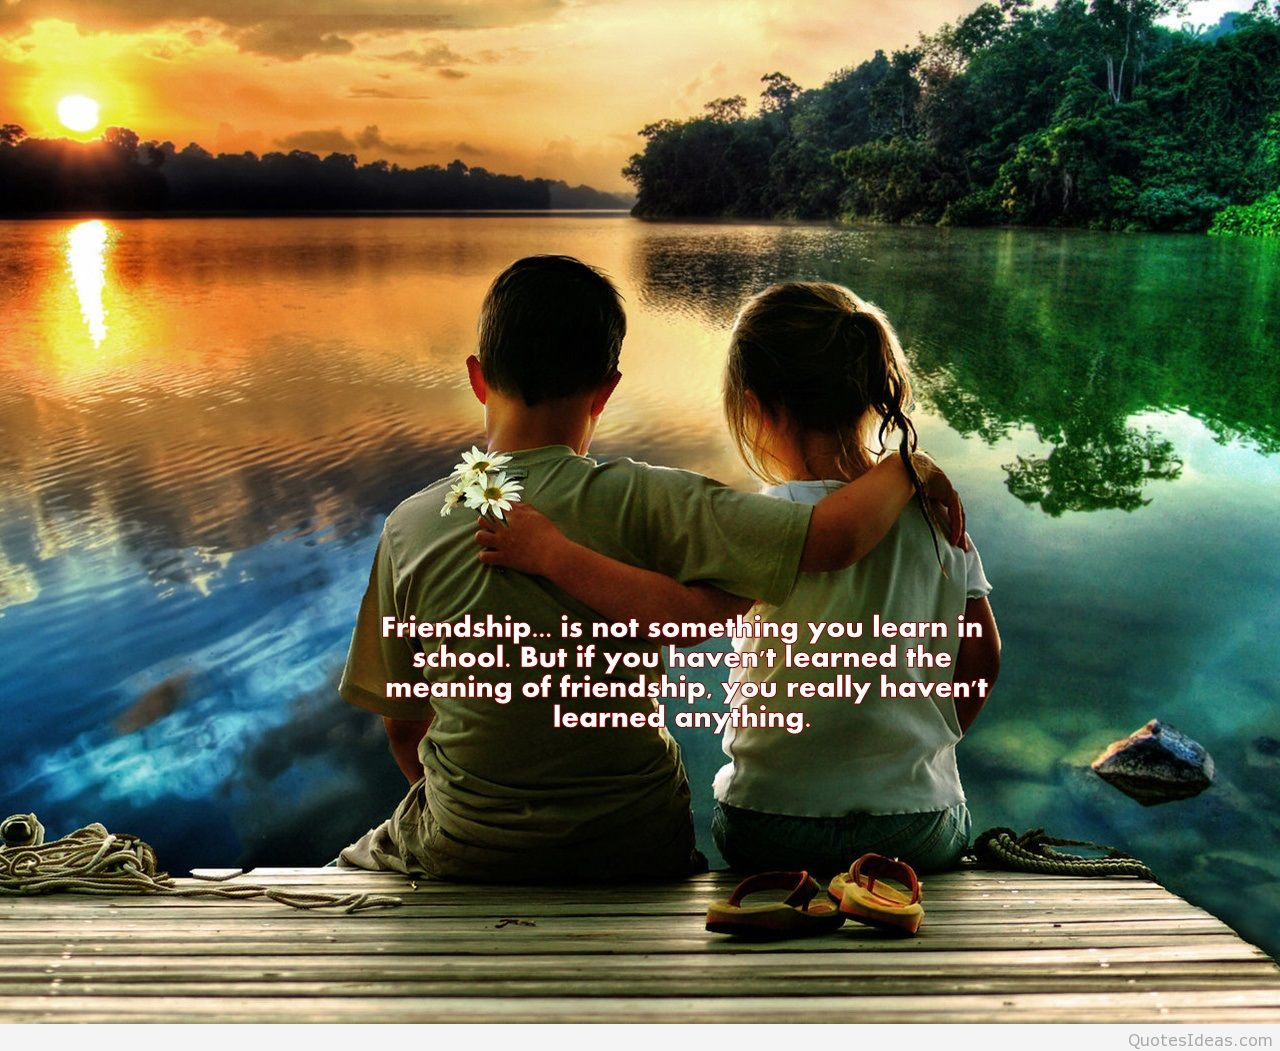 Friendship Quotes For Kids
 Friendship image with kids and quote